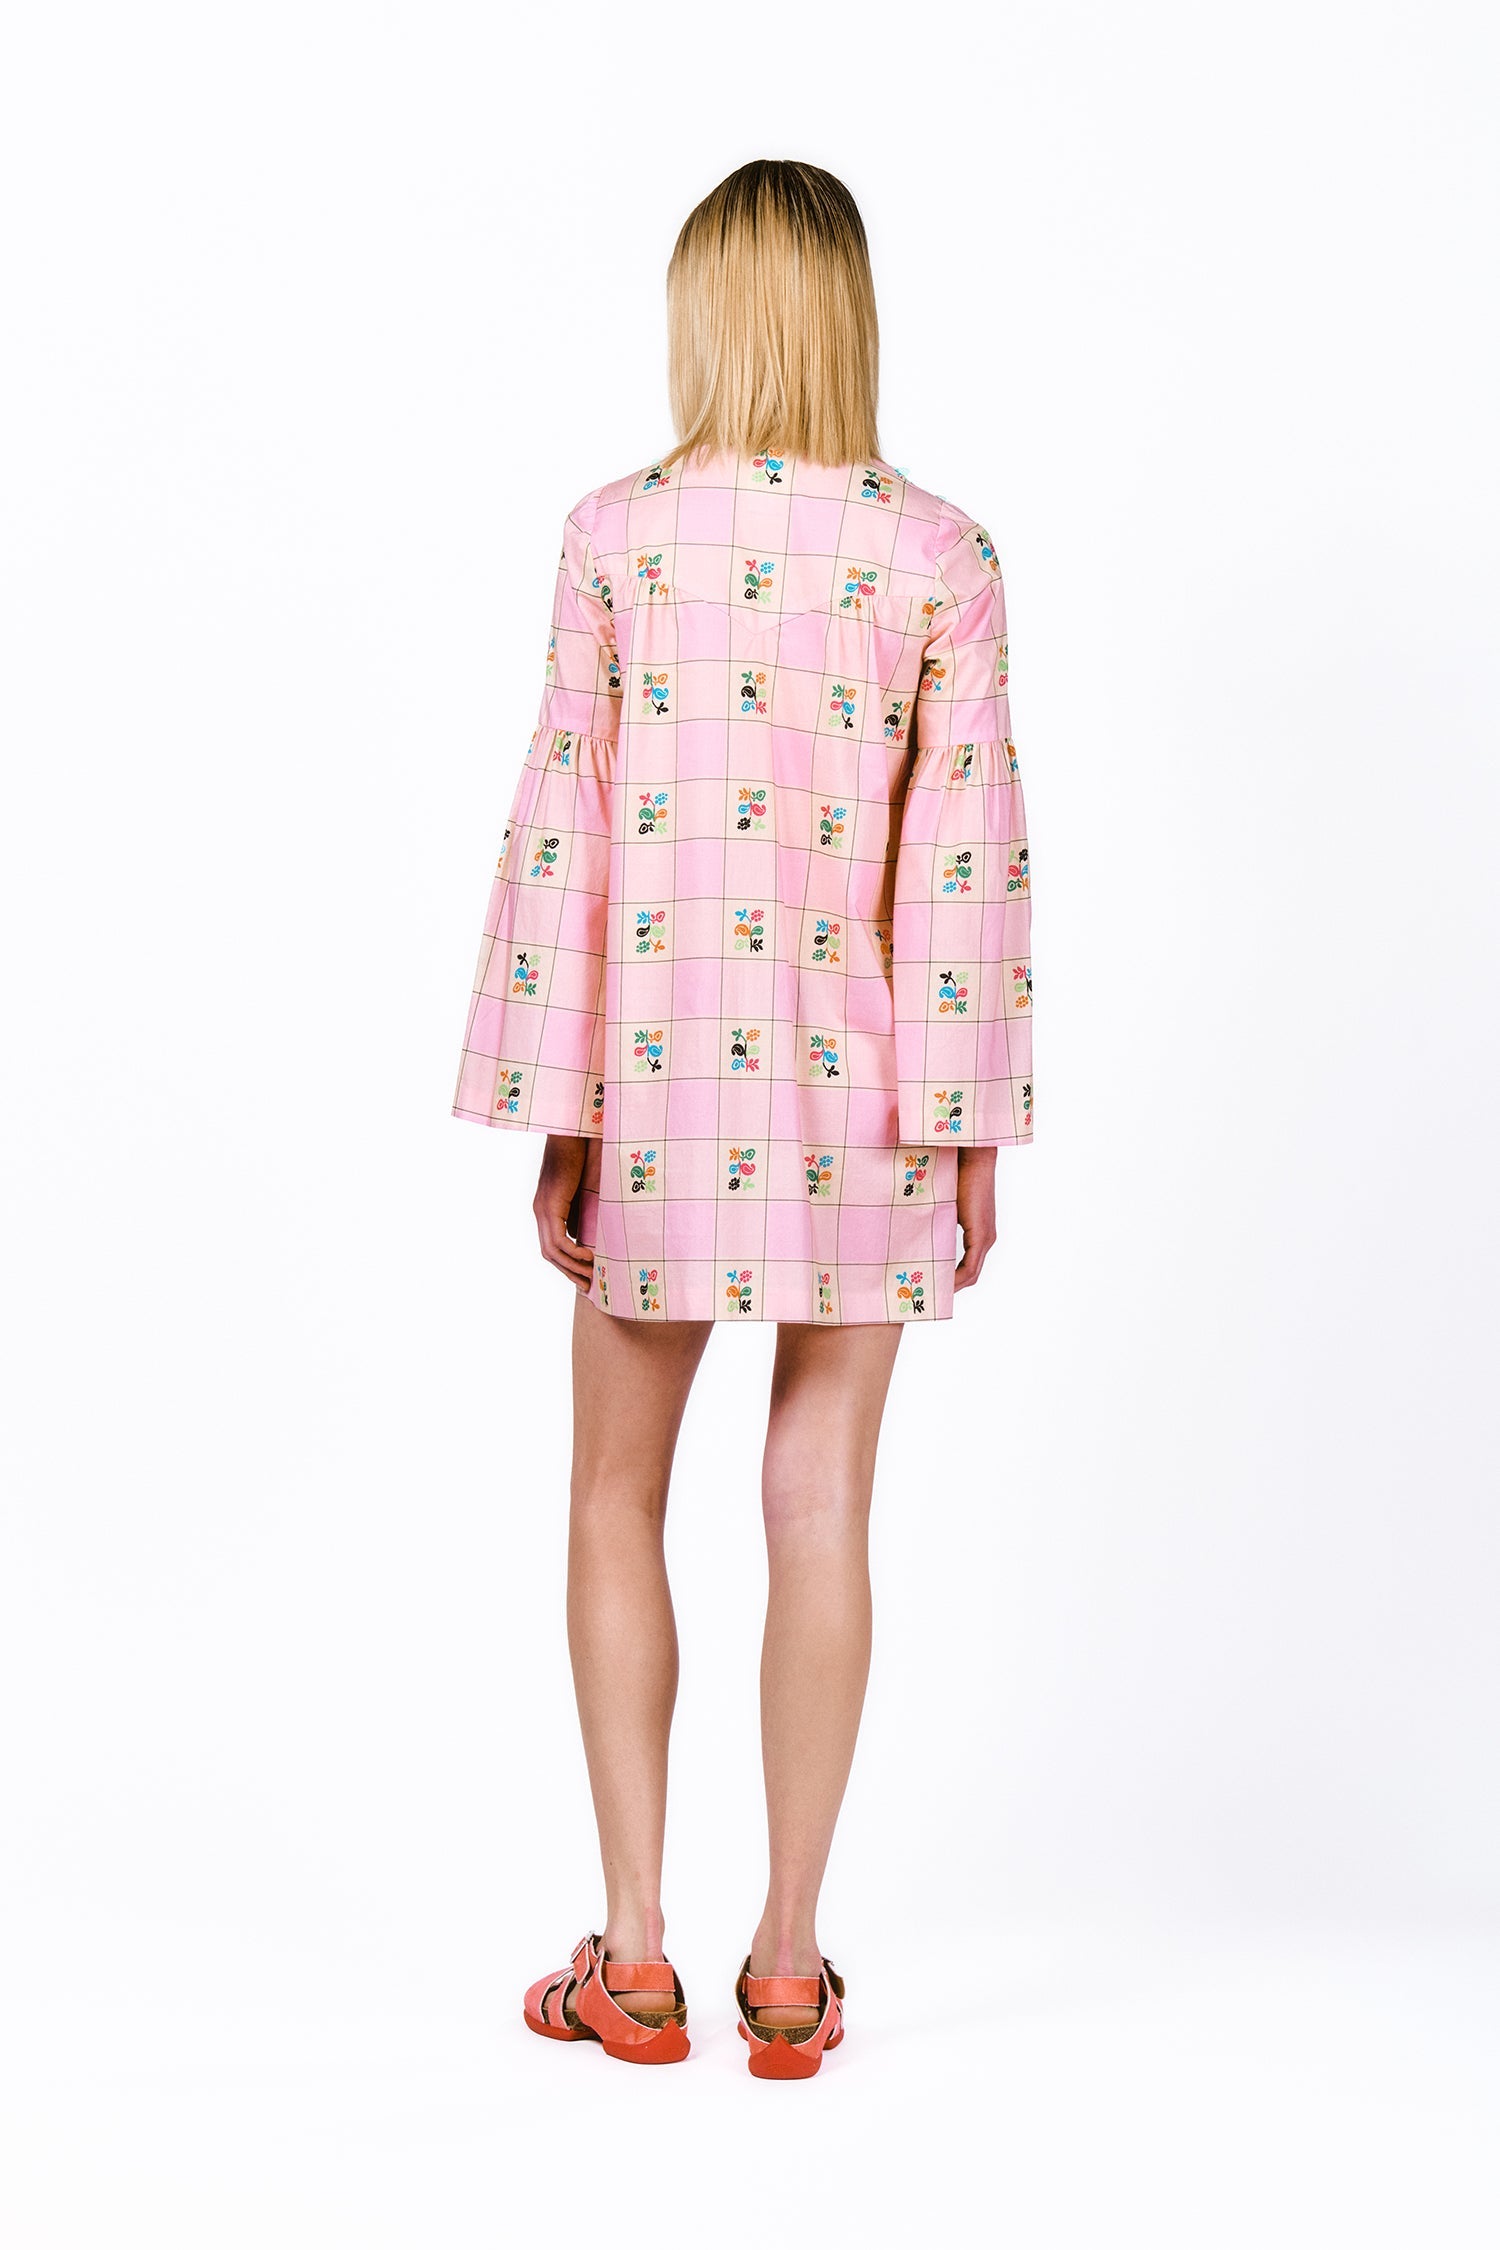 Giant Floral Gingham Embroidered Dress, pink with green floral design in squared pattern